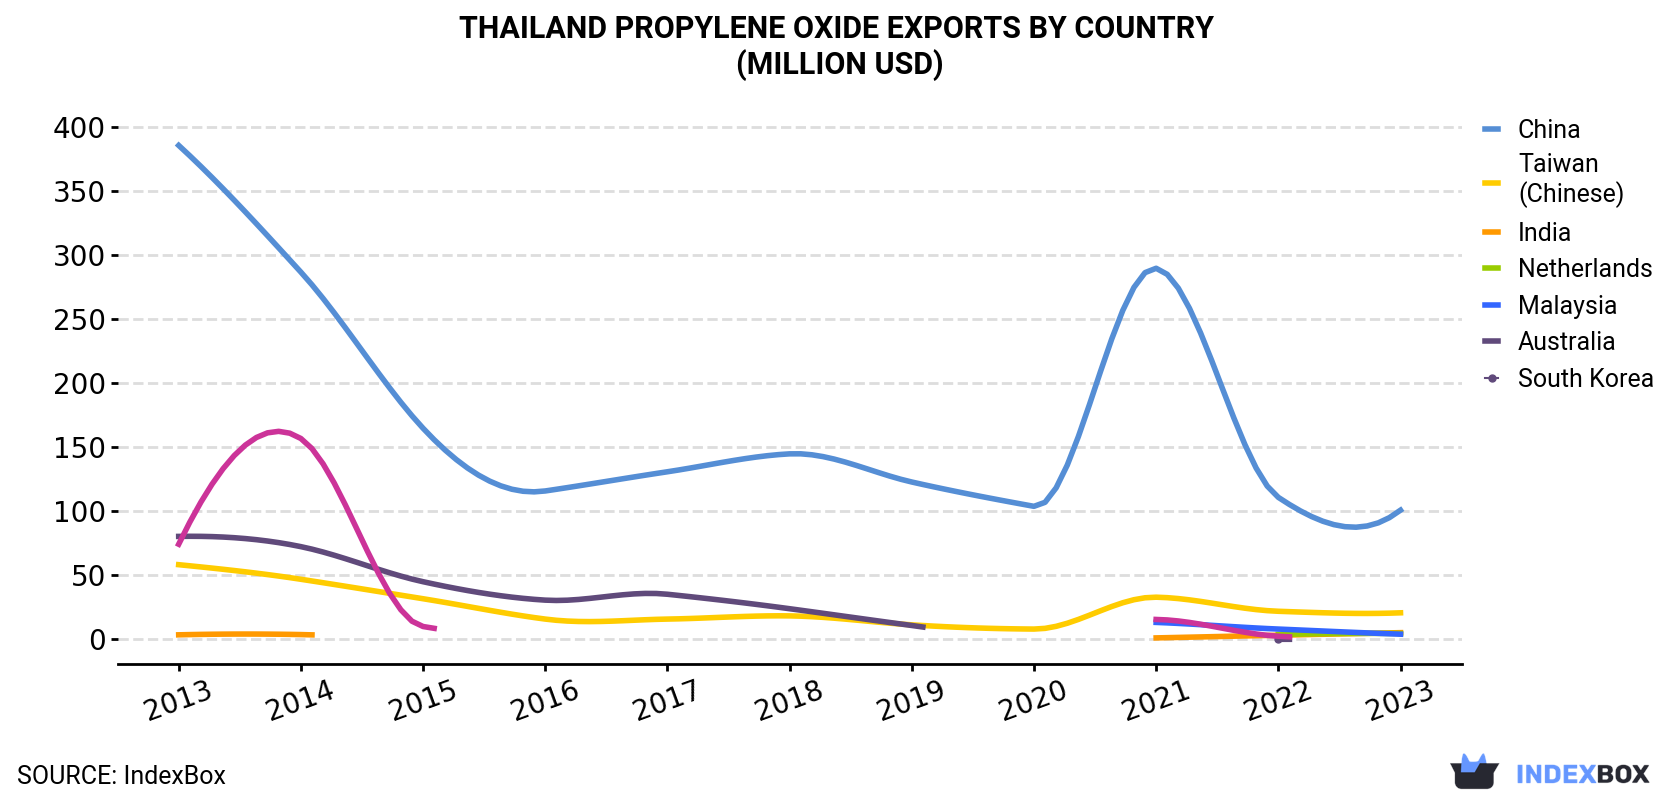 Thailand Propylene Oxide Exports By Country (Million USD)